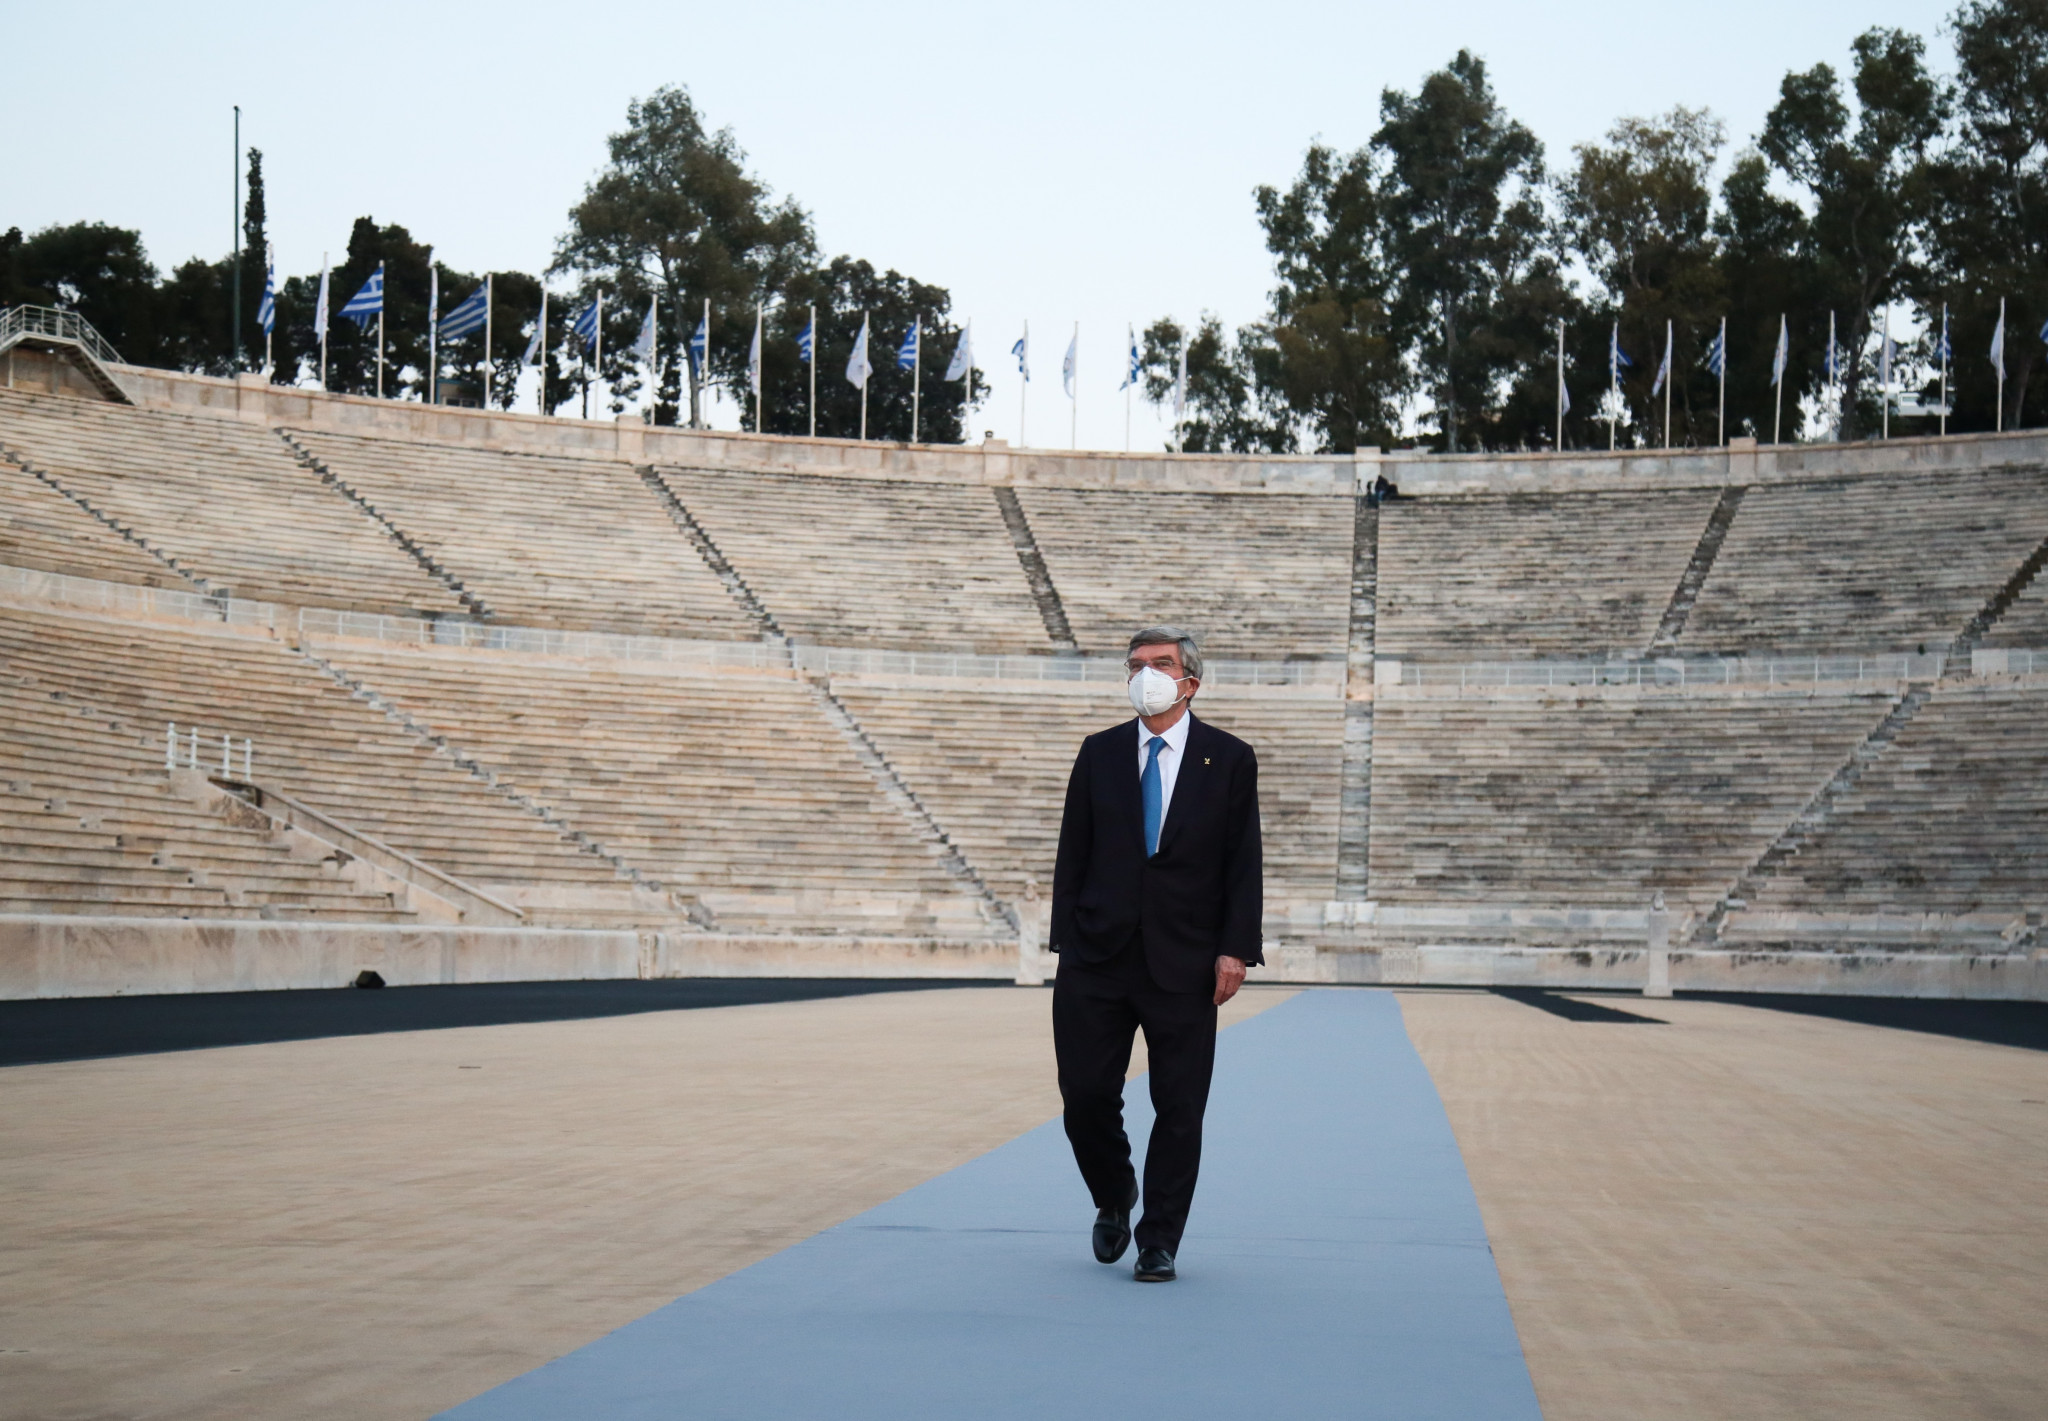 The visit to Athens is Bach's first foreign trip since his re-election as IOC President ©HOC